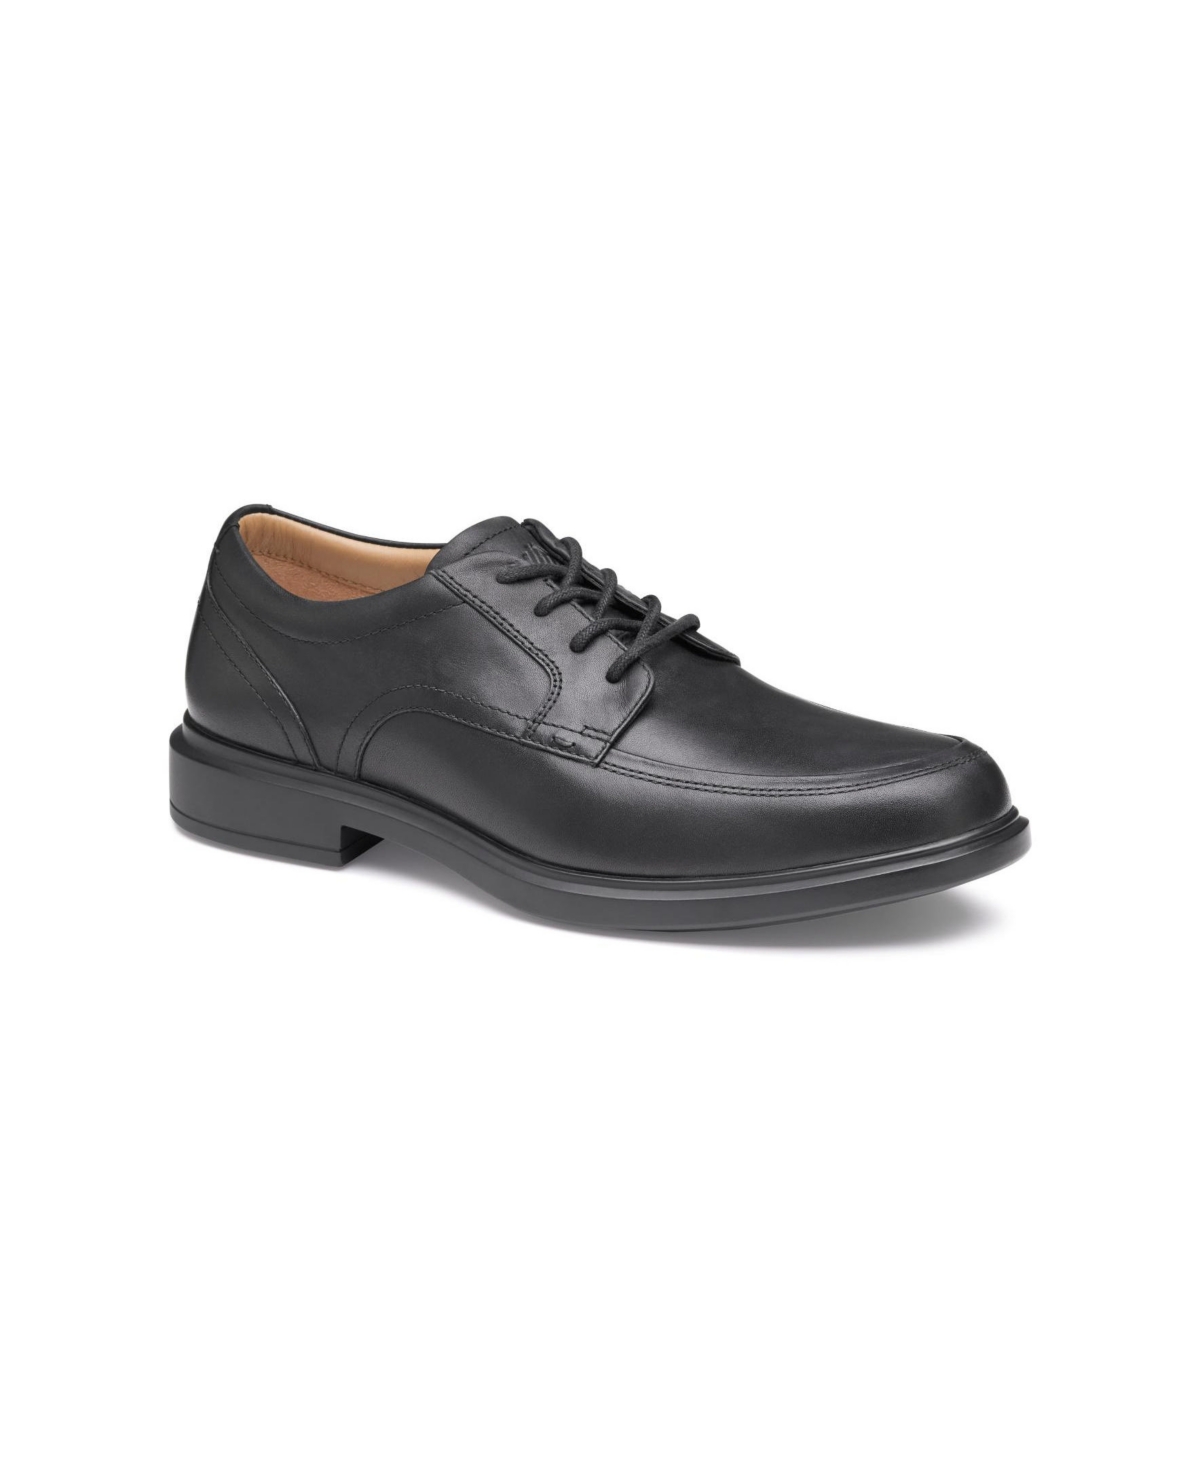 Men's XC4 Stanton 2.0 Moc Waterproof Leather Lace-Up Oxford Shoes - Black Full Grain Leather